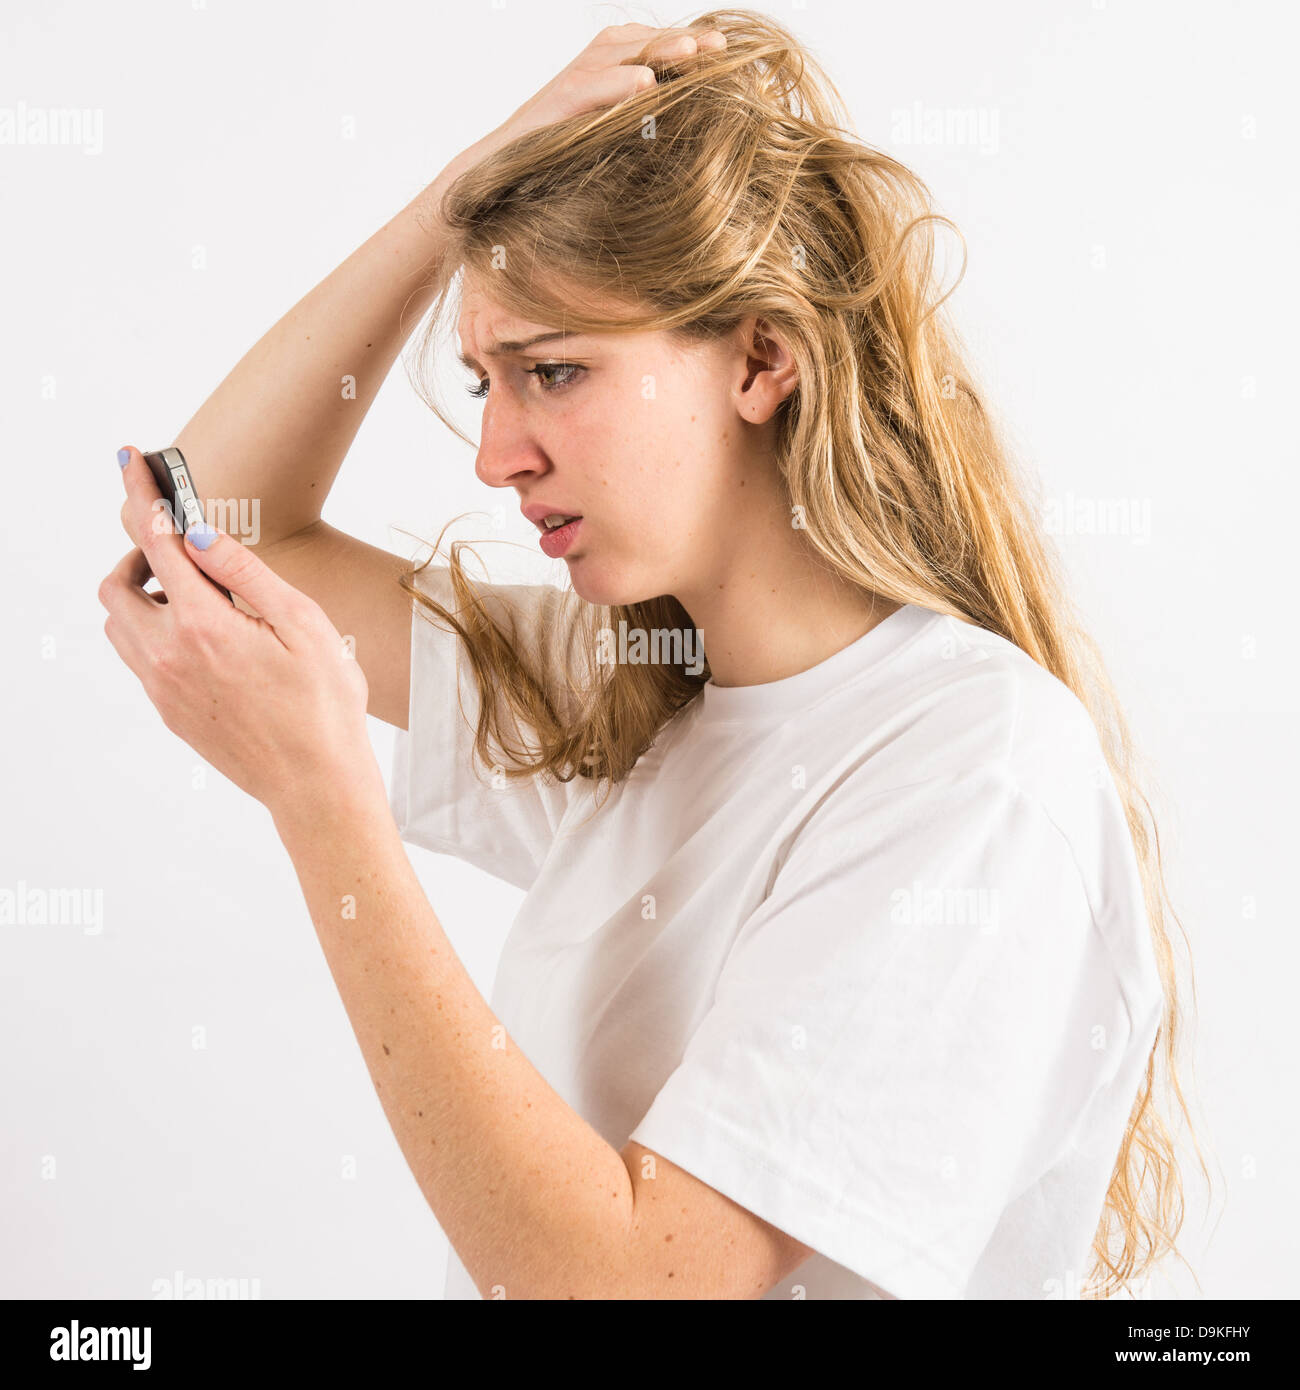 A young woman using an iPhone smart phone looking worried anxious concerned cyber bullying bullied on-line Stock Photo